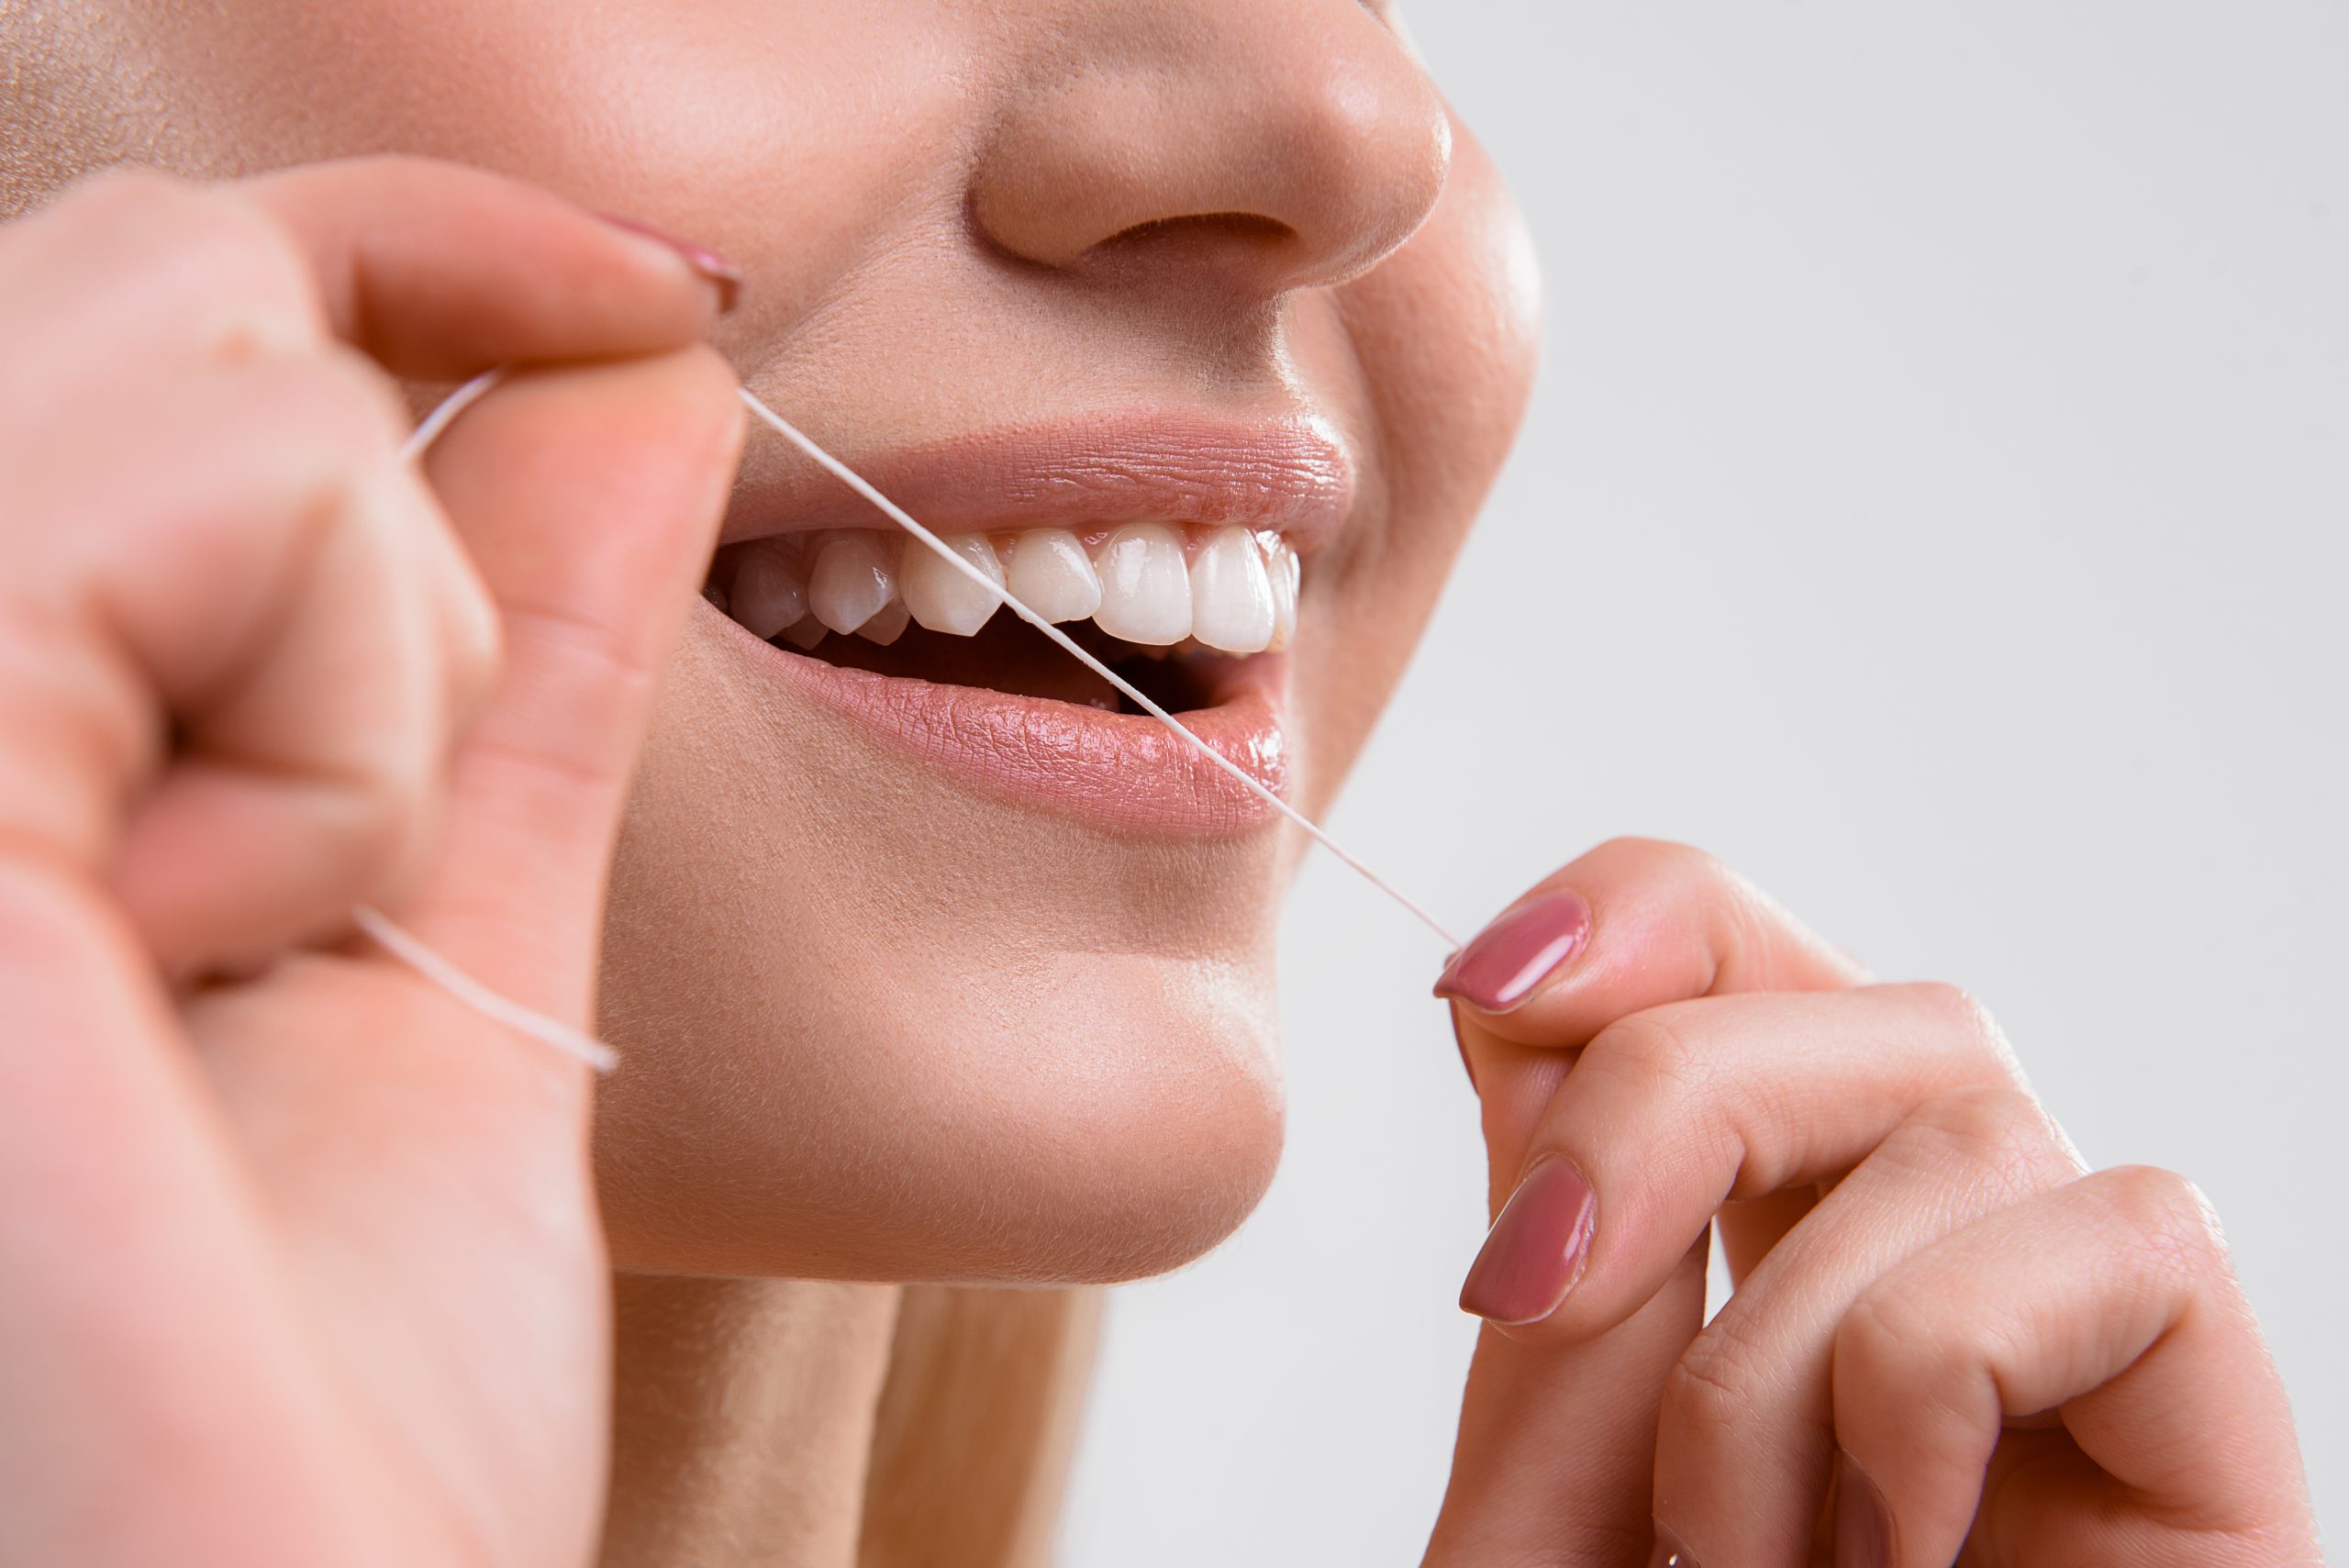 Close up of female mouth. Happy young woman is flossing her teeth and smiling. Isolated